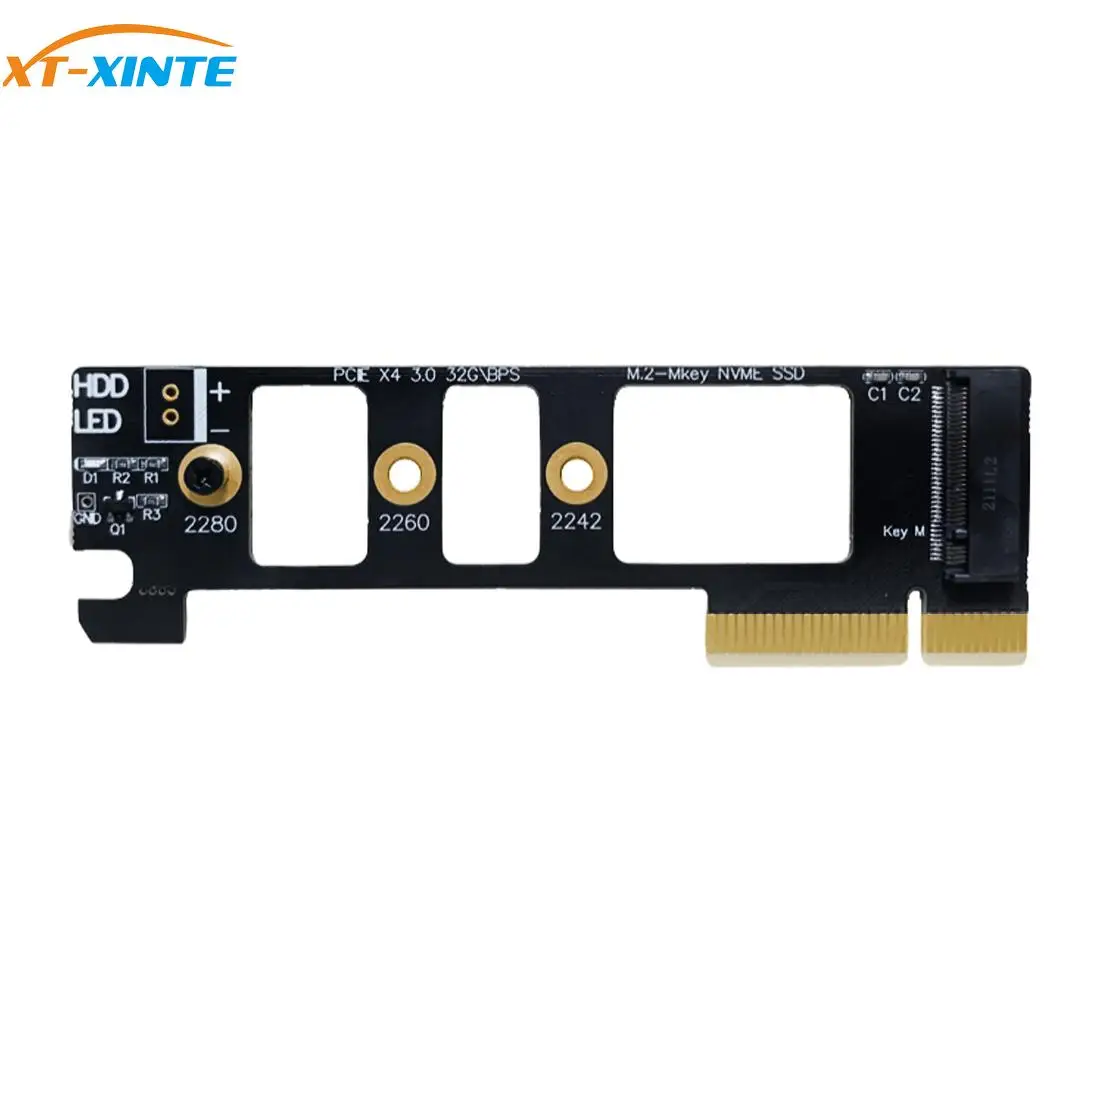 

PCIE 3.0 M.2 key M to PCIe x4 Adapter Card M-Key PCI Express Extension Riser Card 32G/BPS for NVMe 2280 2260 2242 SSD